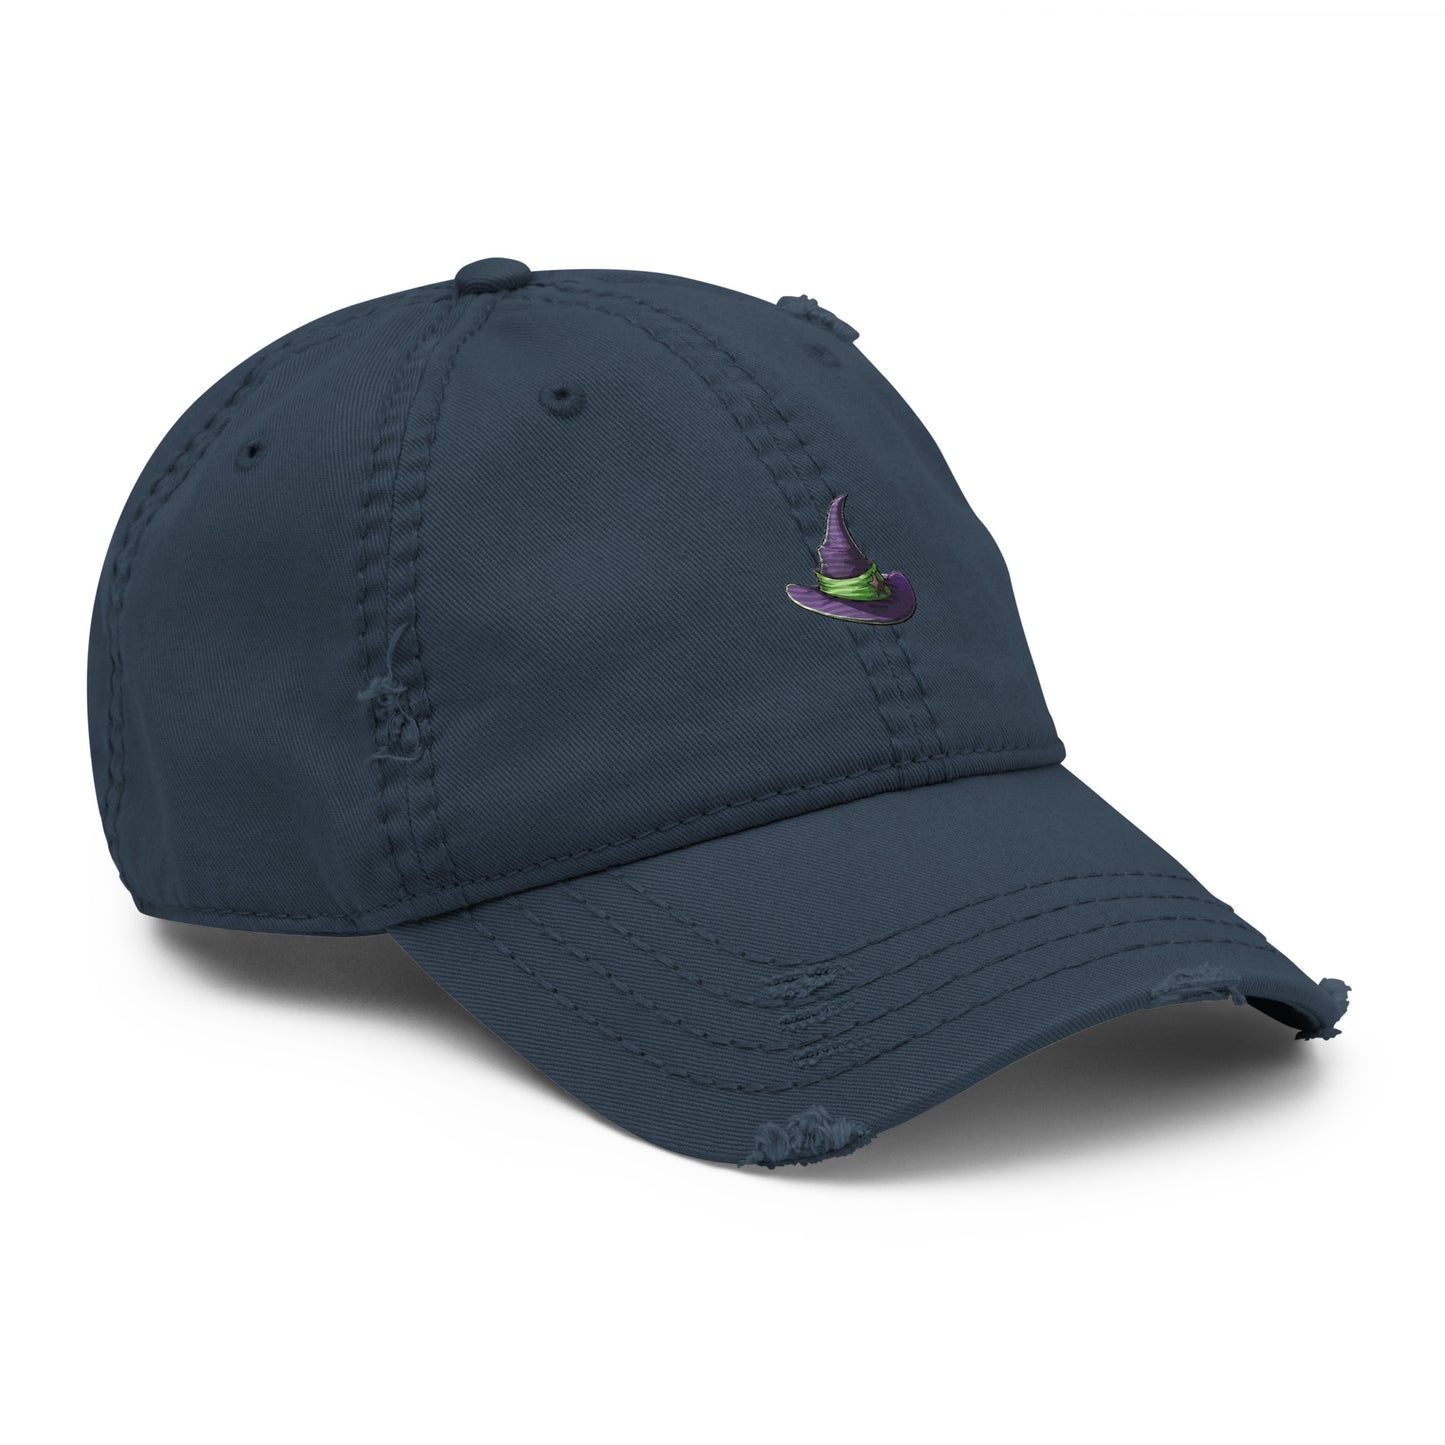 Trucker Cap with Witch Hat Symbol